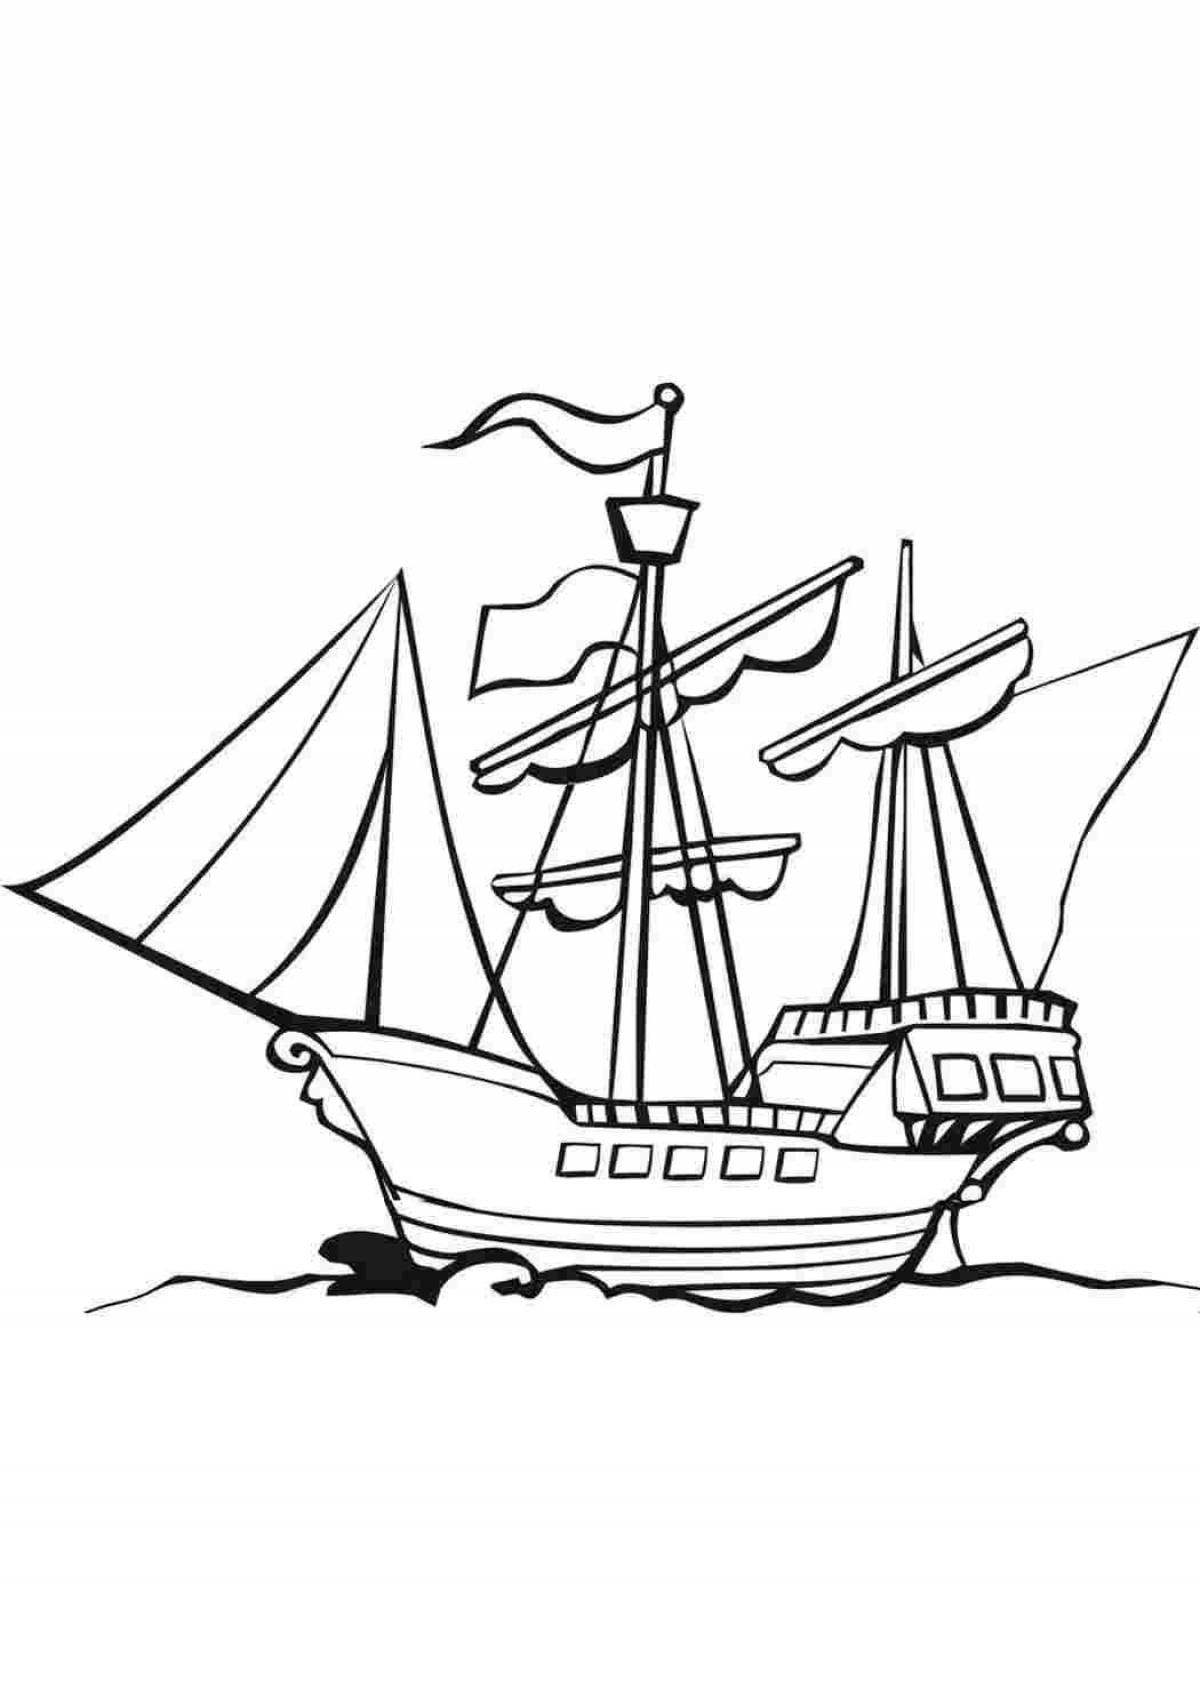 Colorful water transport coloring page